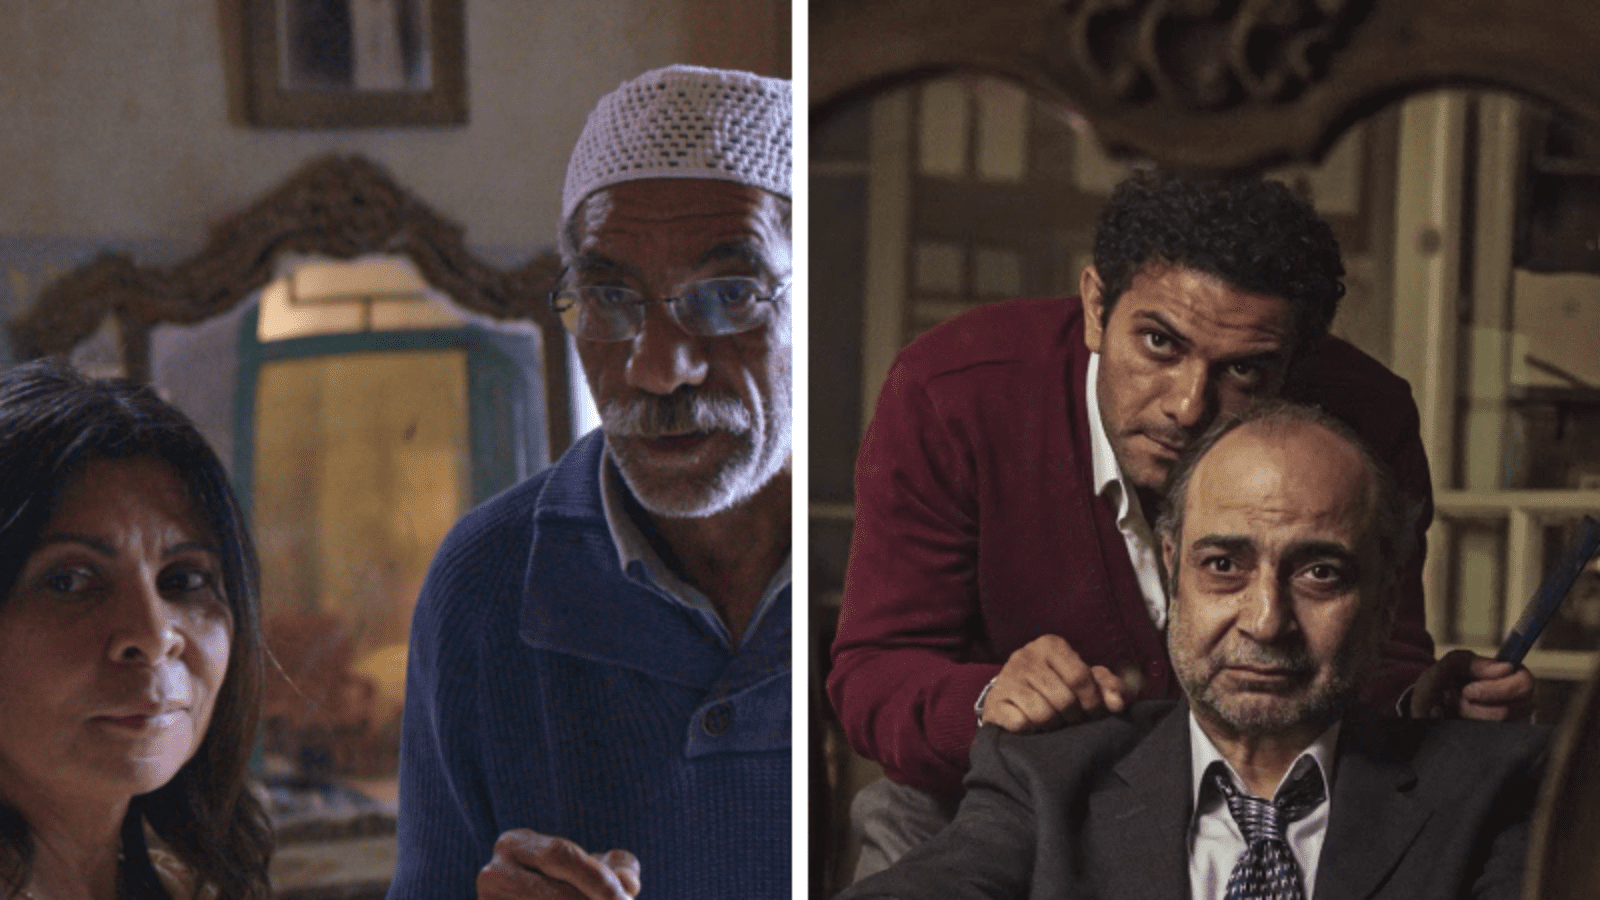 The 5th Arab Film Festival Zurich will Screen 5 Egyptian Movies!